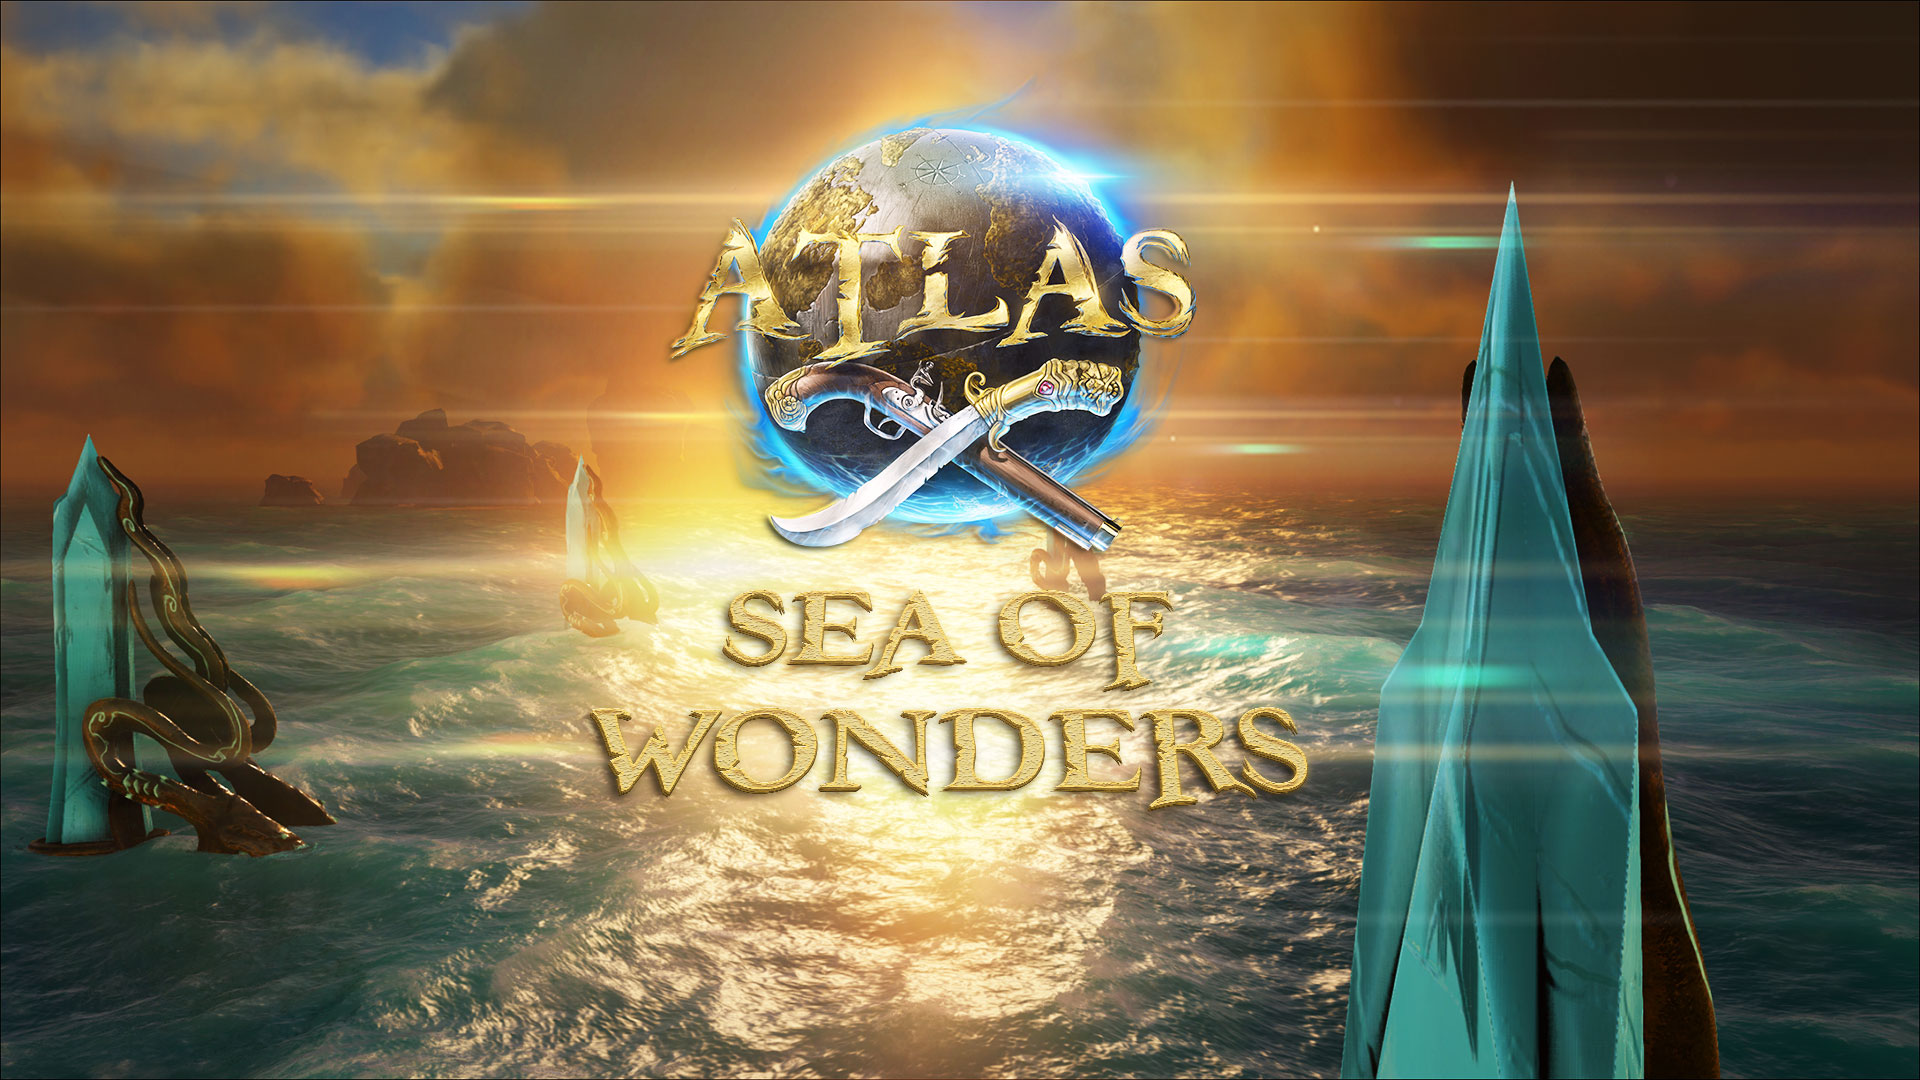 Video For Atlas – Sea of Wonders Now Available on Xbox One